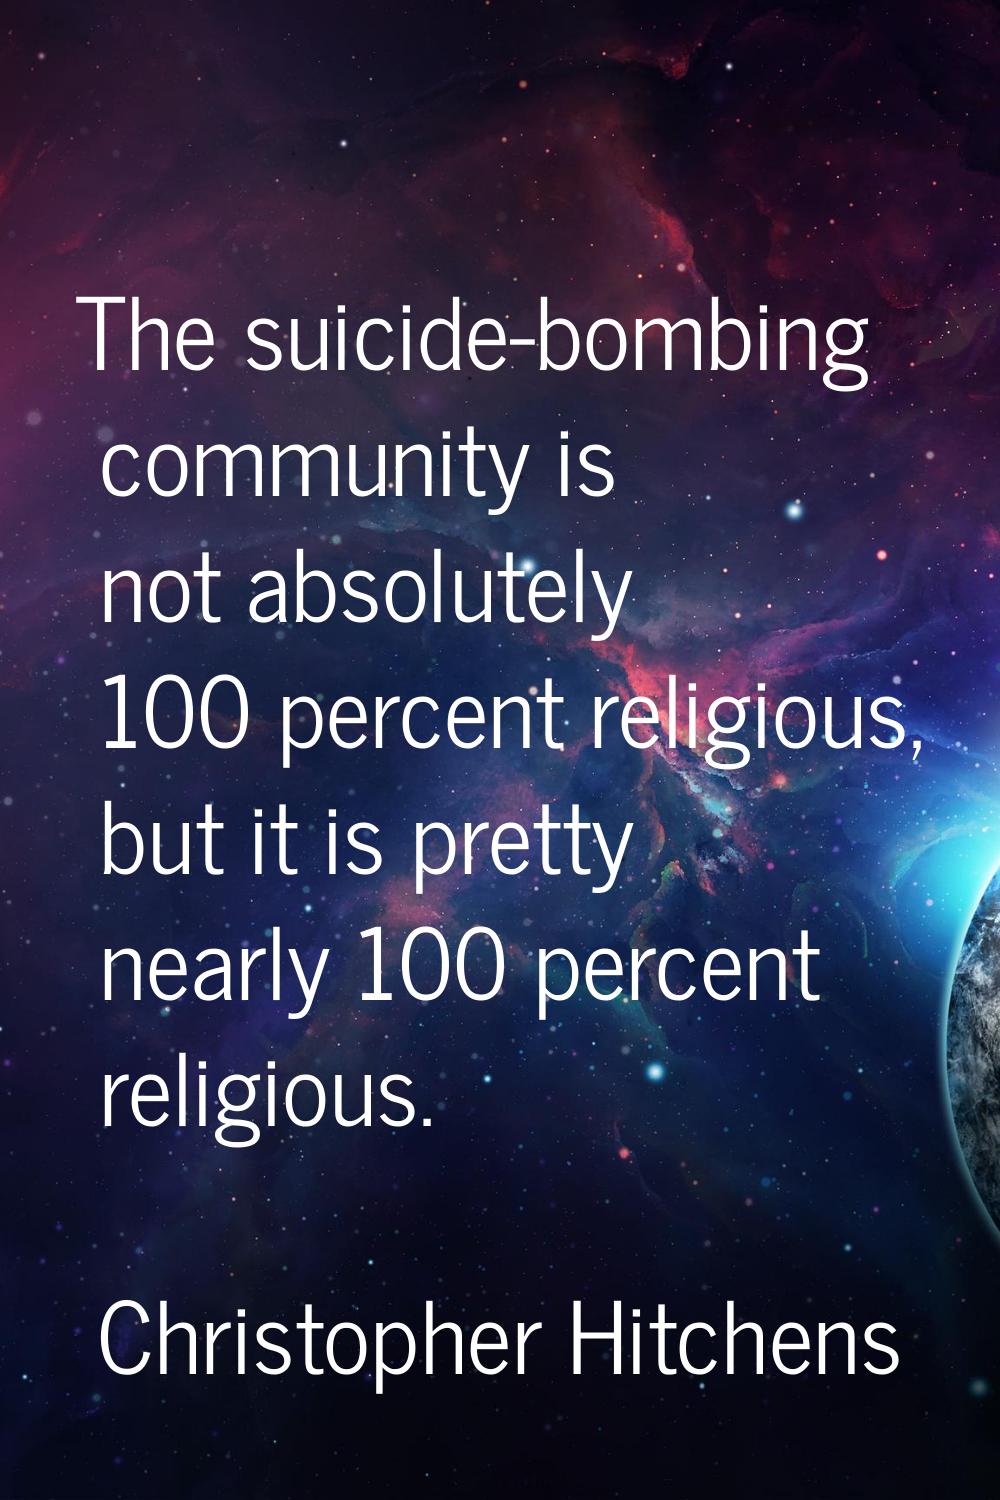 The suicide-bombing community is not absolutely 100 percent religious, but it is pretty nearly 100 